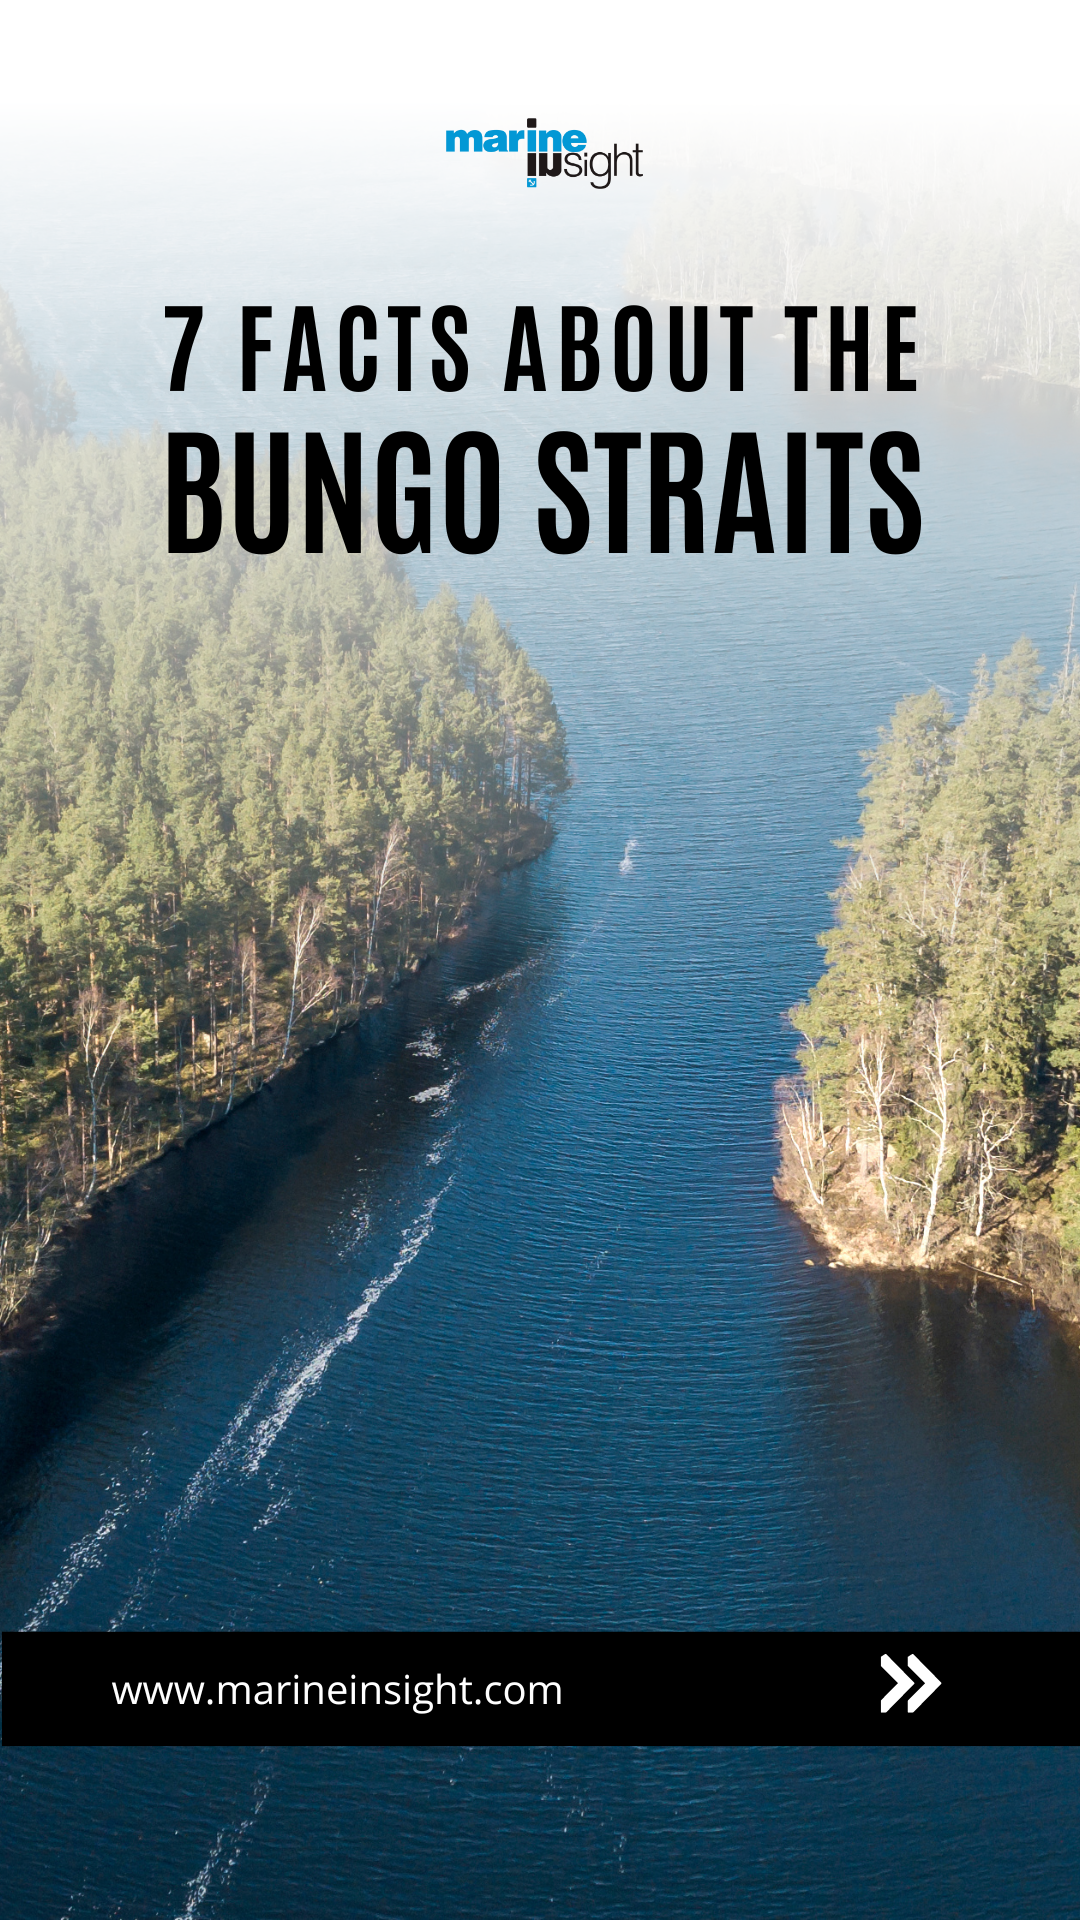 7 Amazing Facts About The Bungo Straits